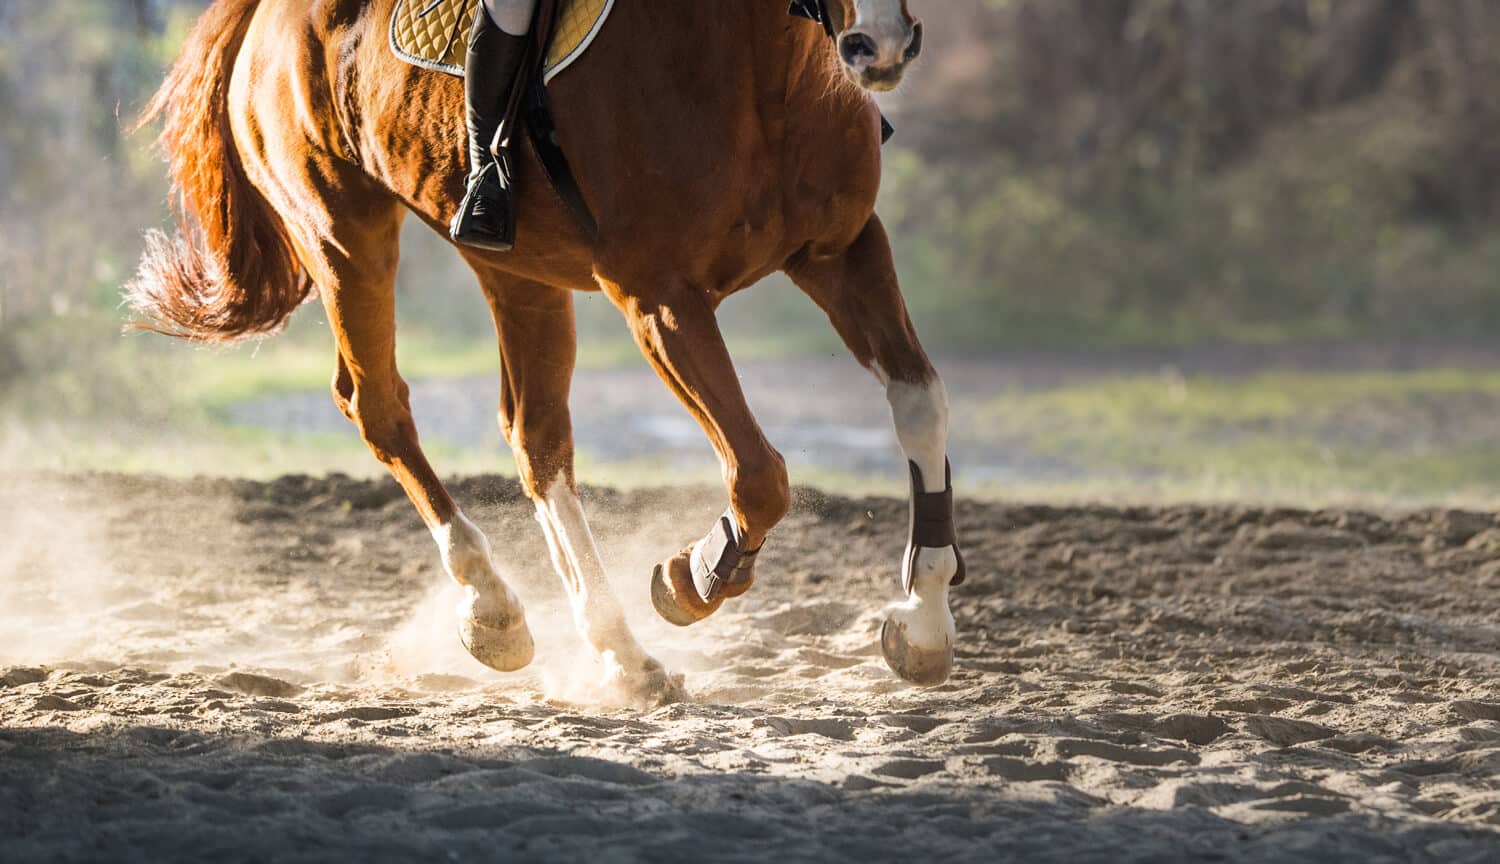 What are the risk factors for arthritis in horses?